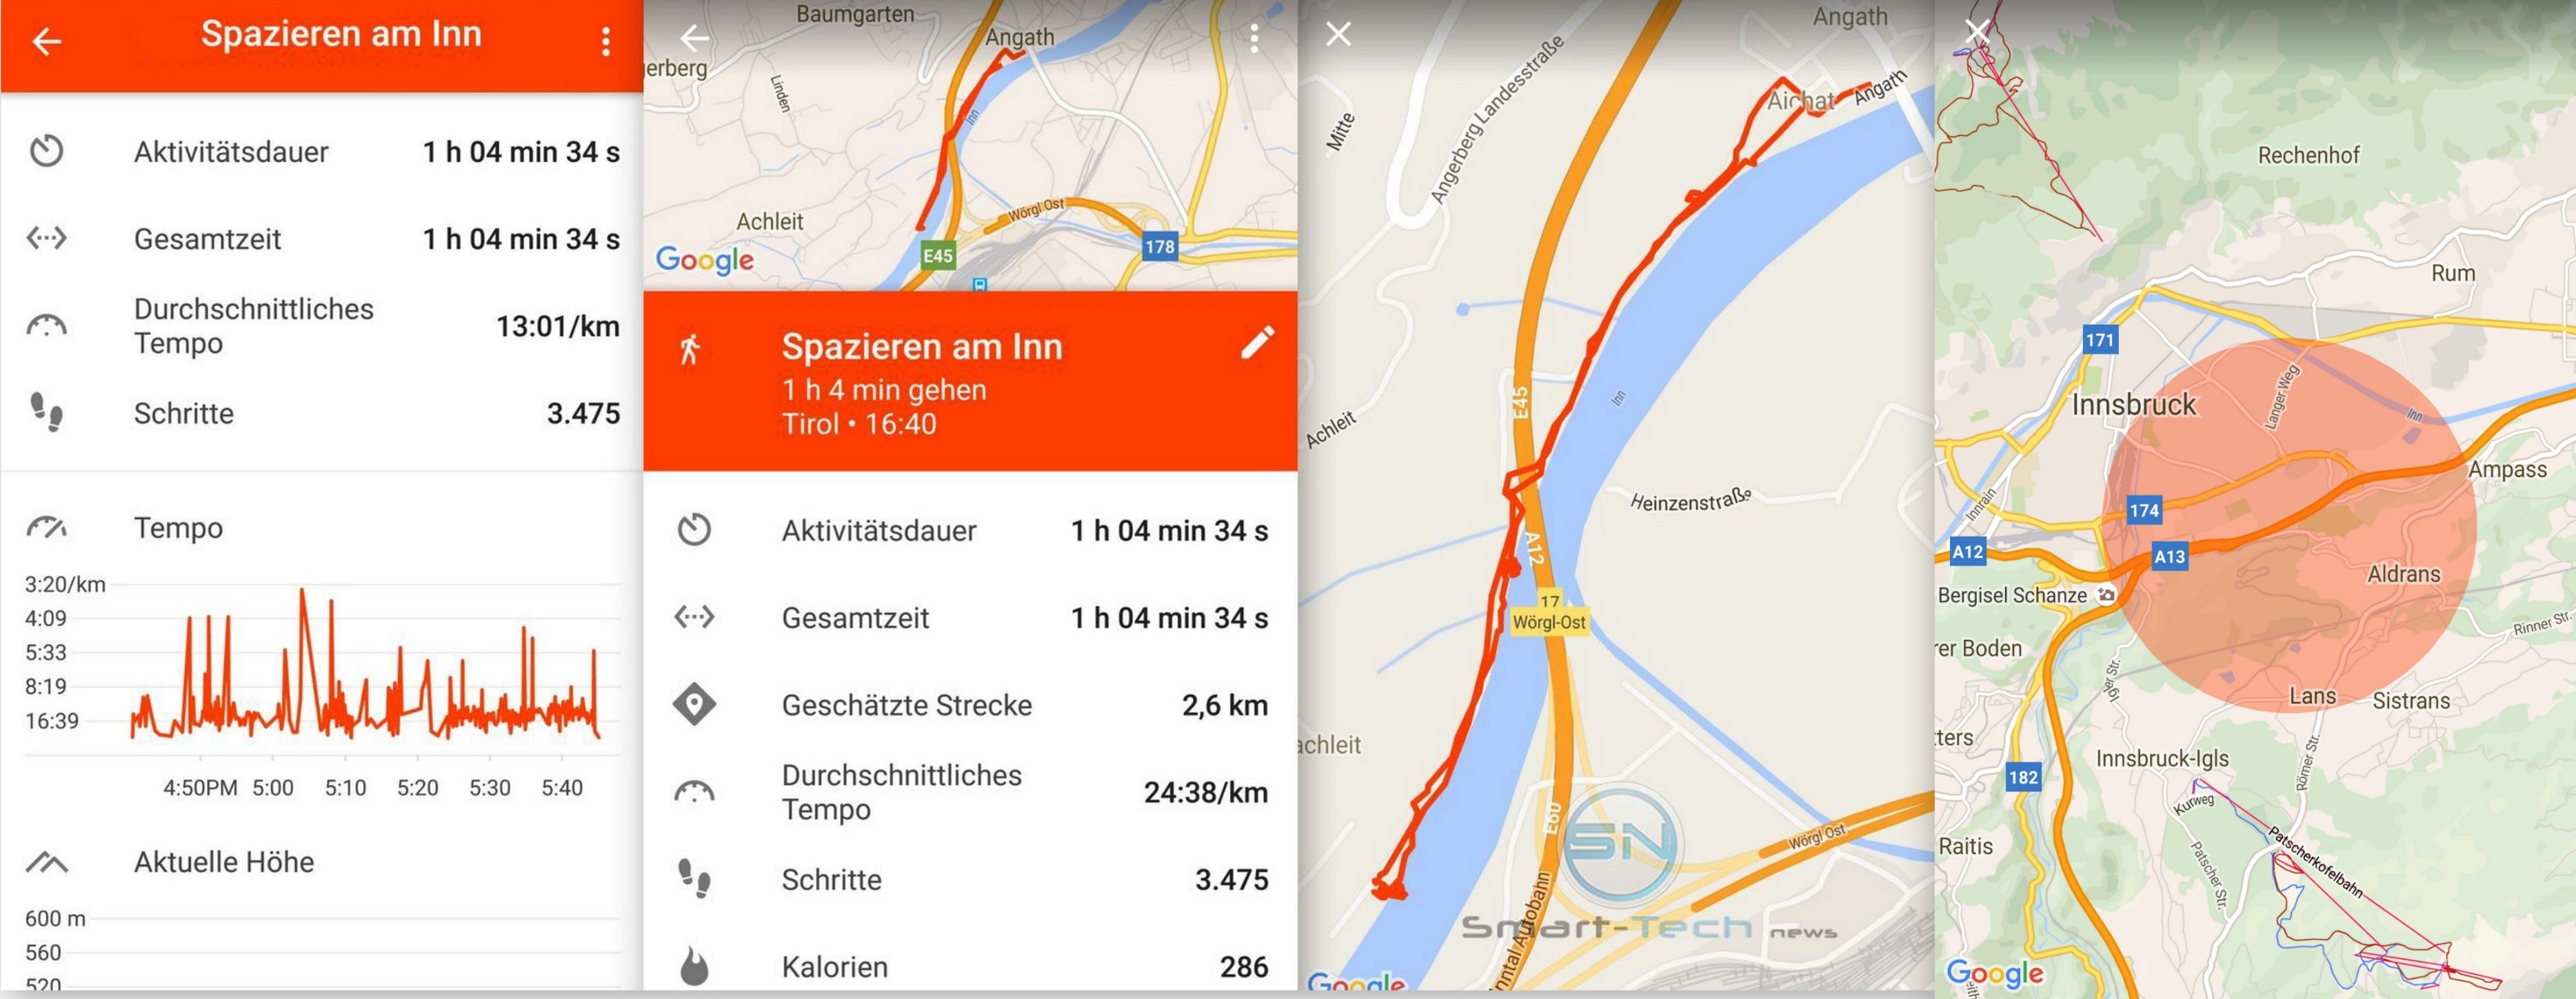 GPS Tracking per Google Fit - Xiaomi MiBand 1s - SmartTechNews